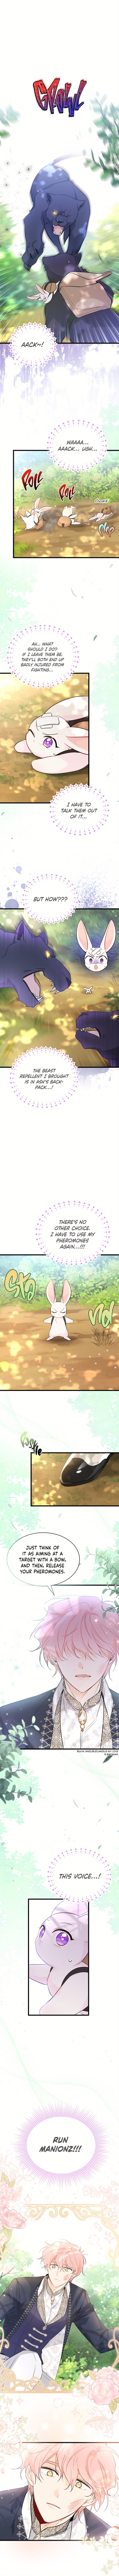 The Symbiotic Relationship Between A Rabbit and A Black Panther Chapter 61 - Page 5